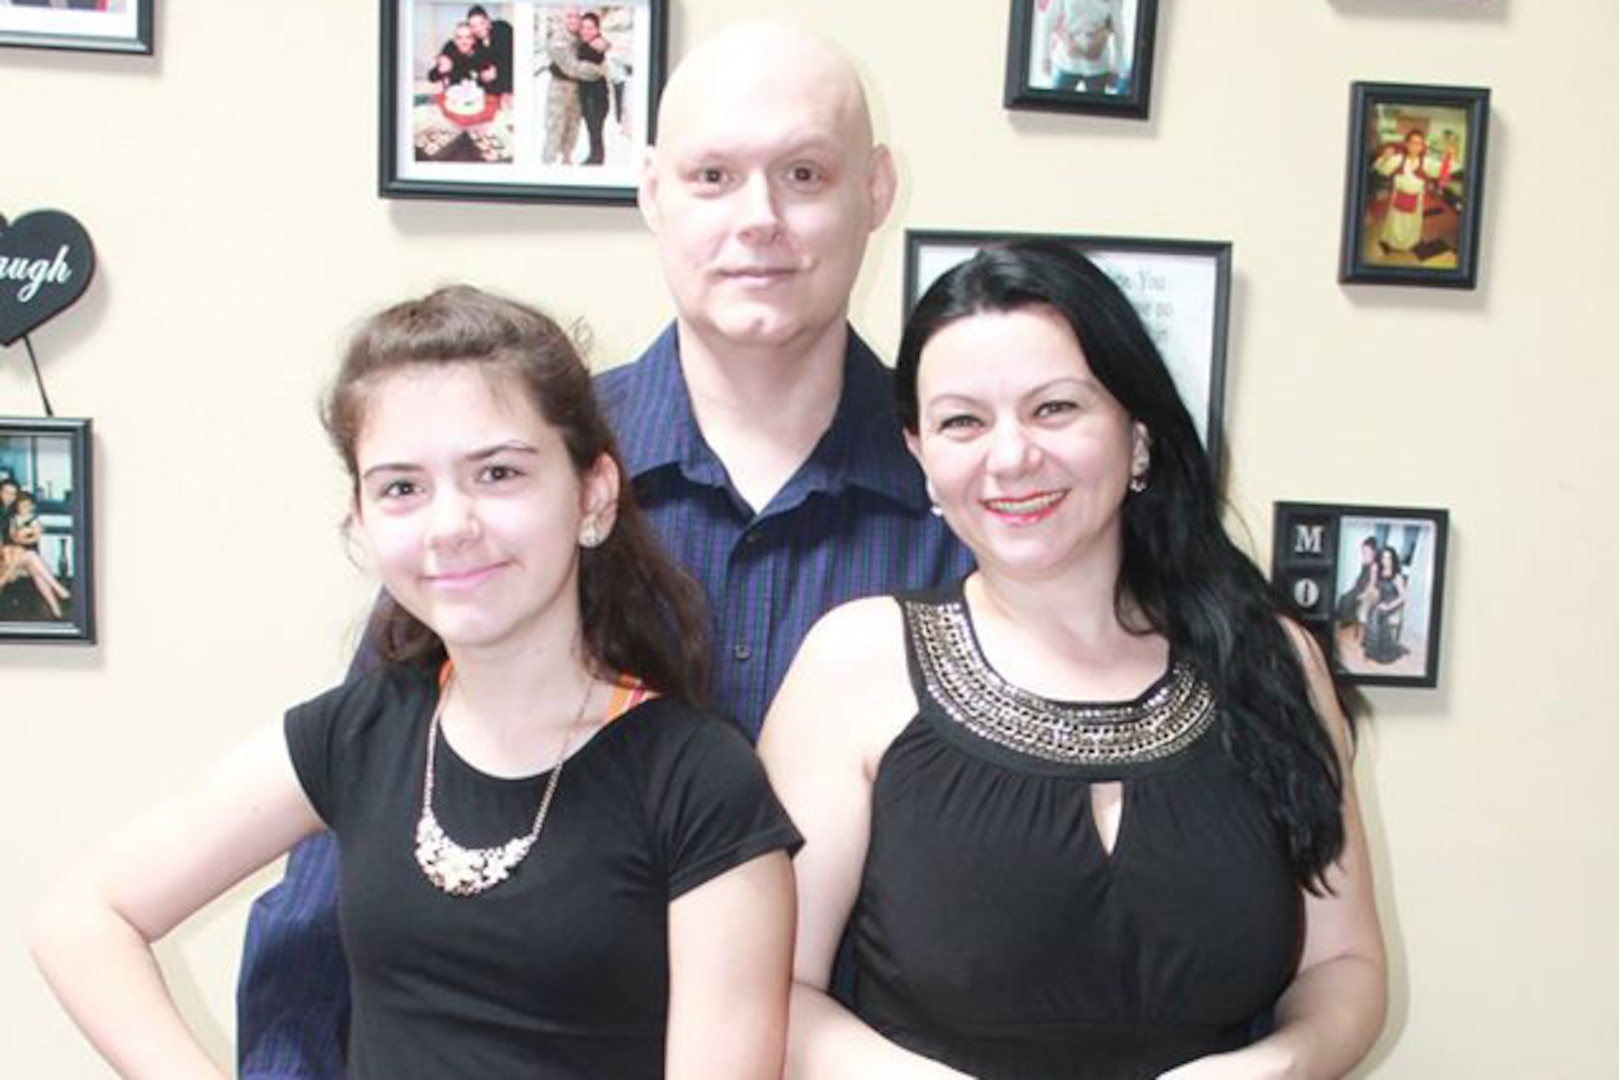 Robert Brandt, his wife Shahe and his daughter Jasmina at home in Pennsylvania.